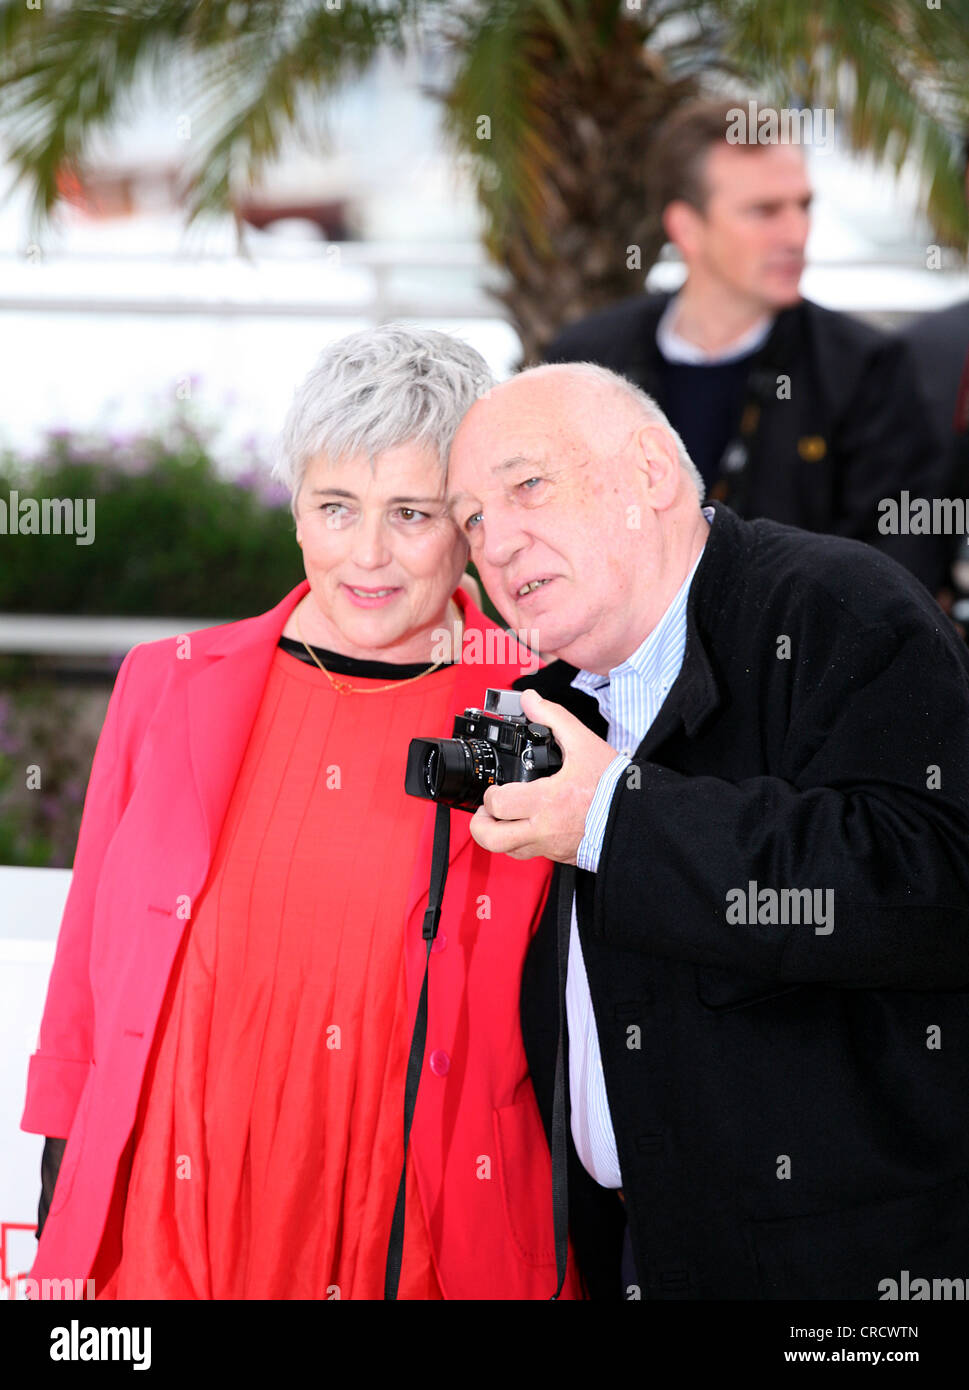 Directors Raymond Depardon and Claudine Nougaret at the Journal De France photocall at the 65th Cannes Film Festival France. Stock Photo